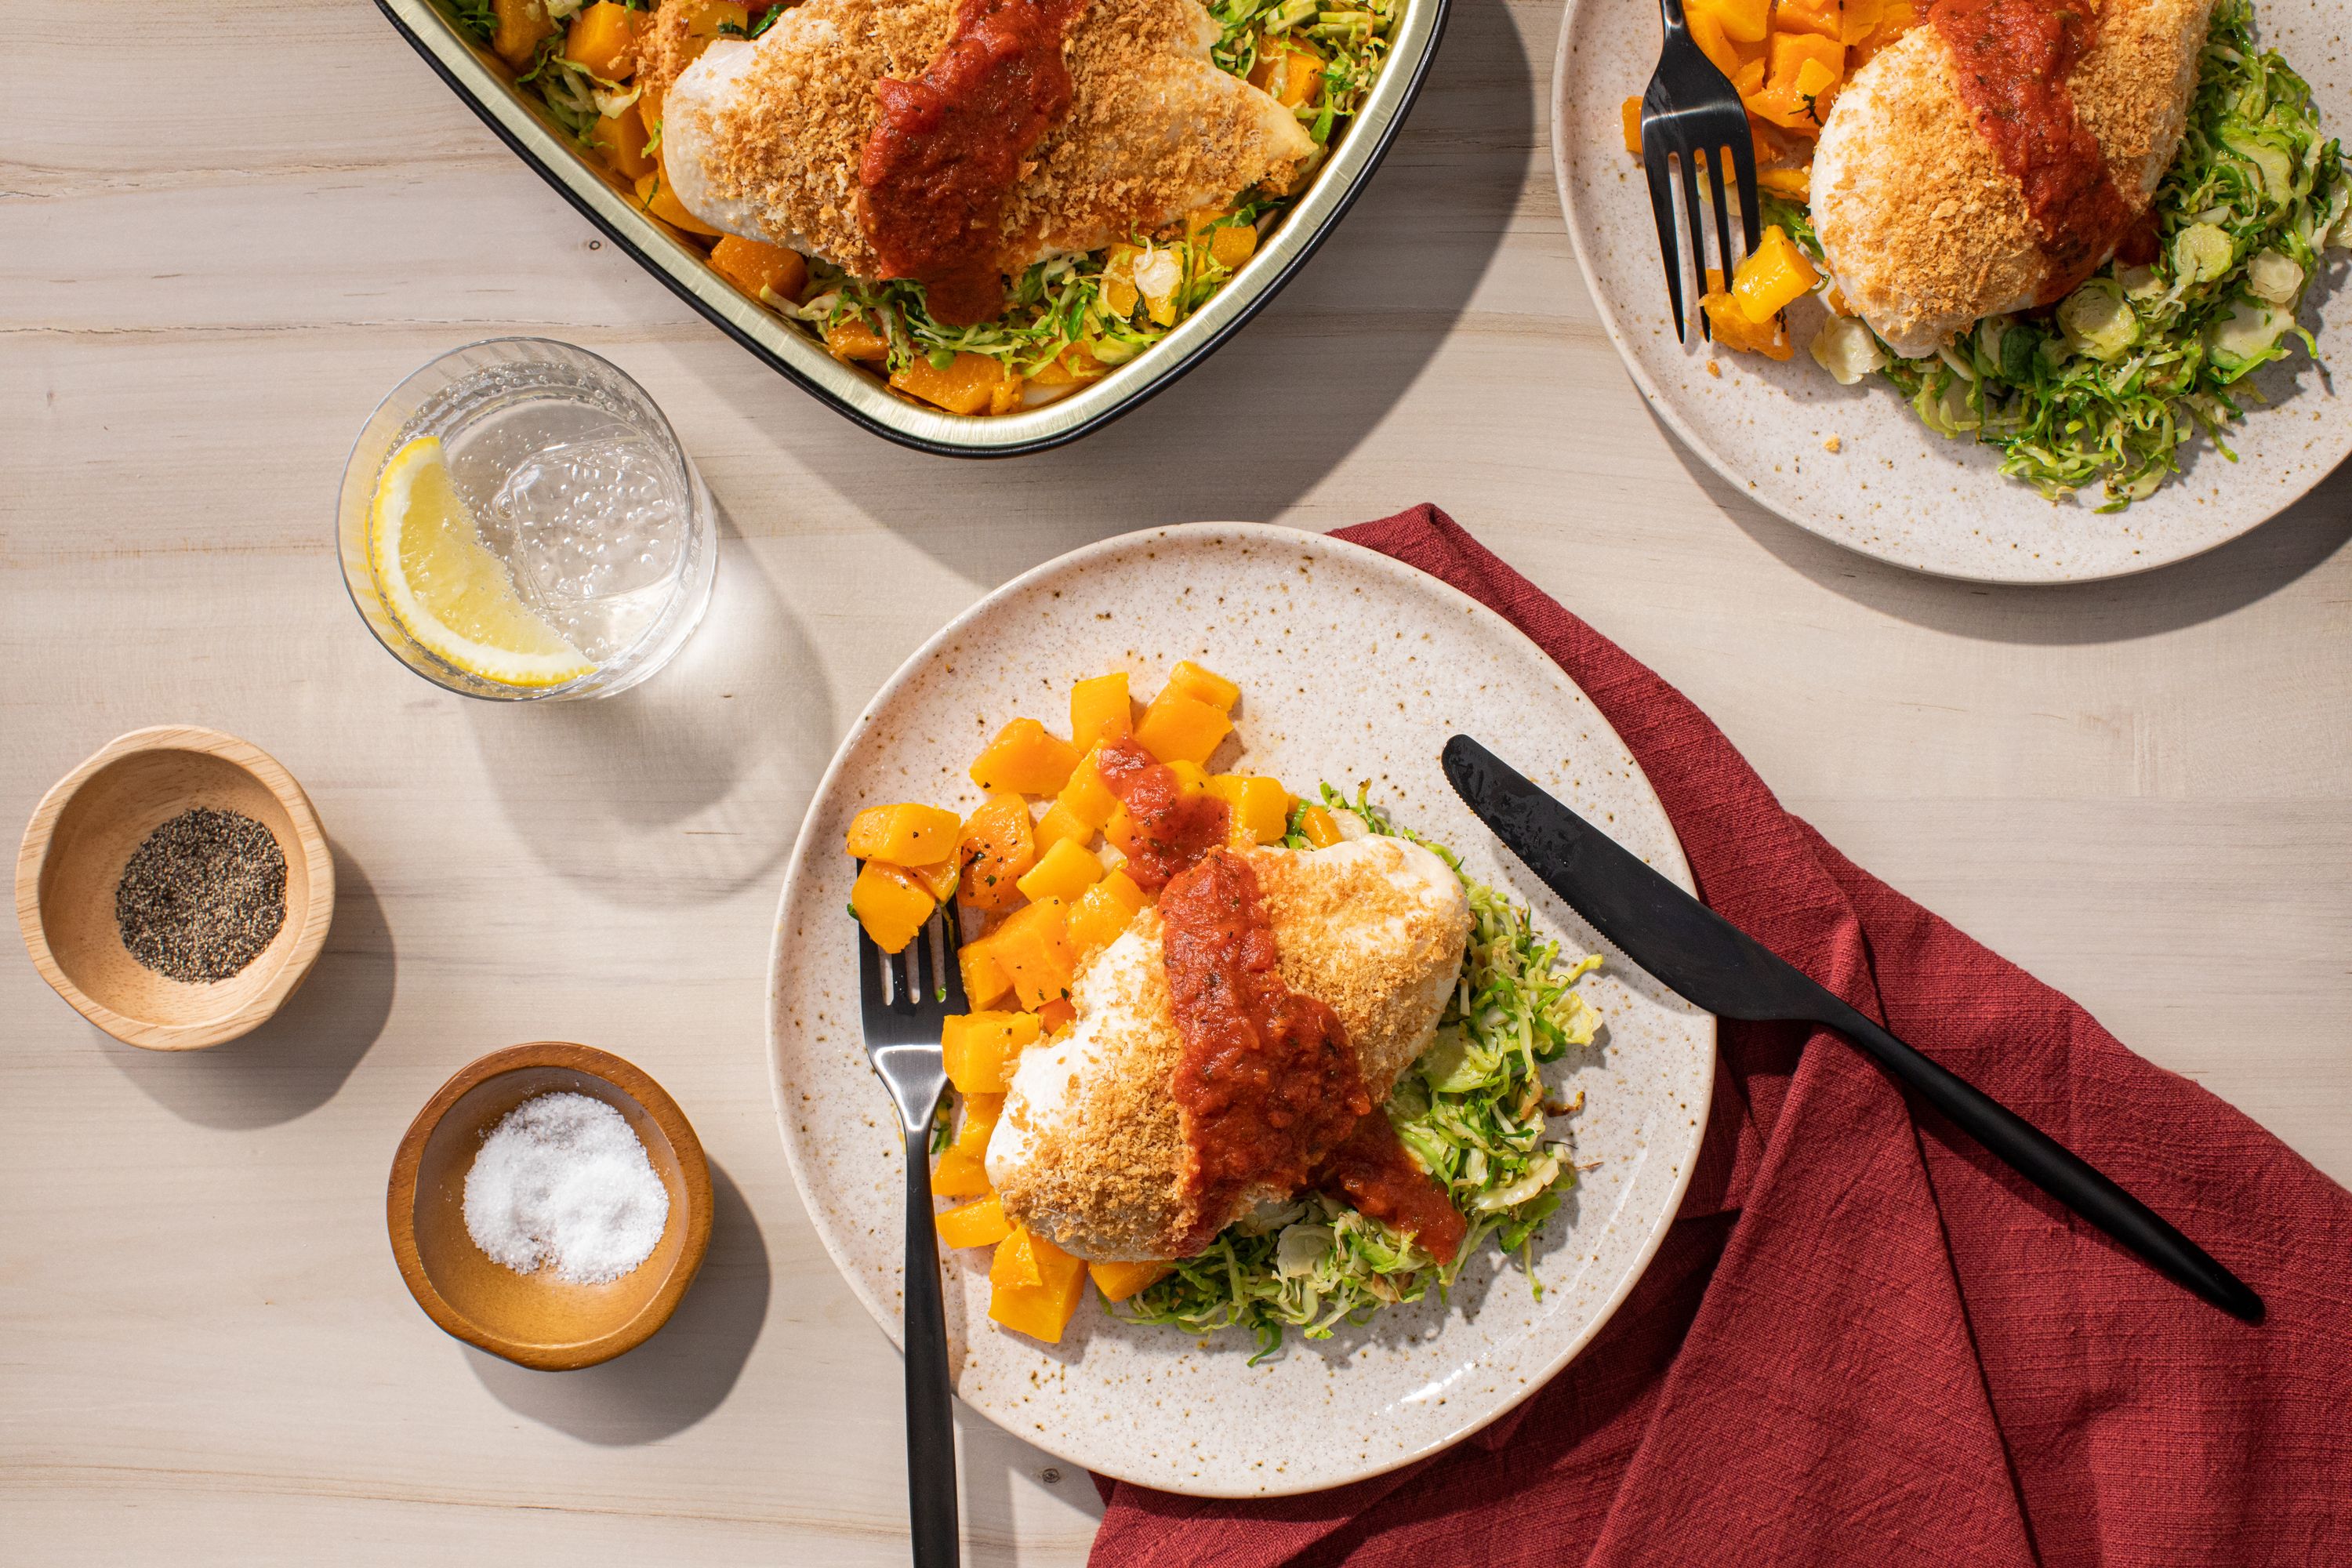 https://hips.hearstapps.com/hmg-prod/images/baked-chicken-parmesan-with-garlic-herb-butternut-squash-and-brussels-sprouts-1-ana-plefka-655c0f346f32b.jpg